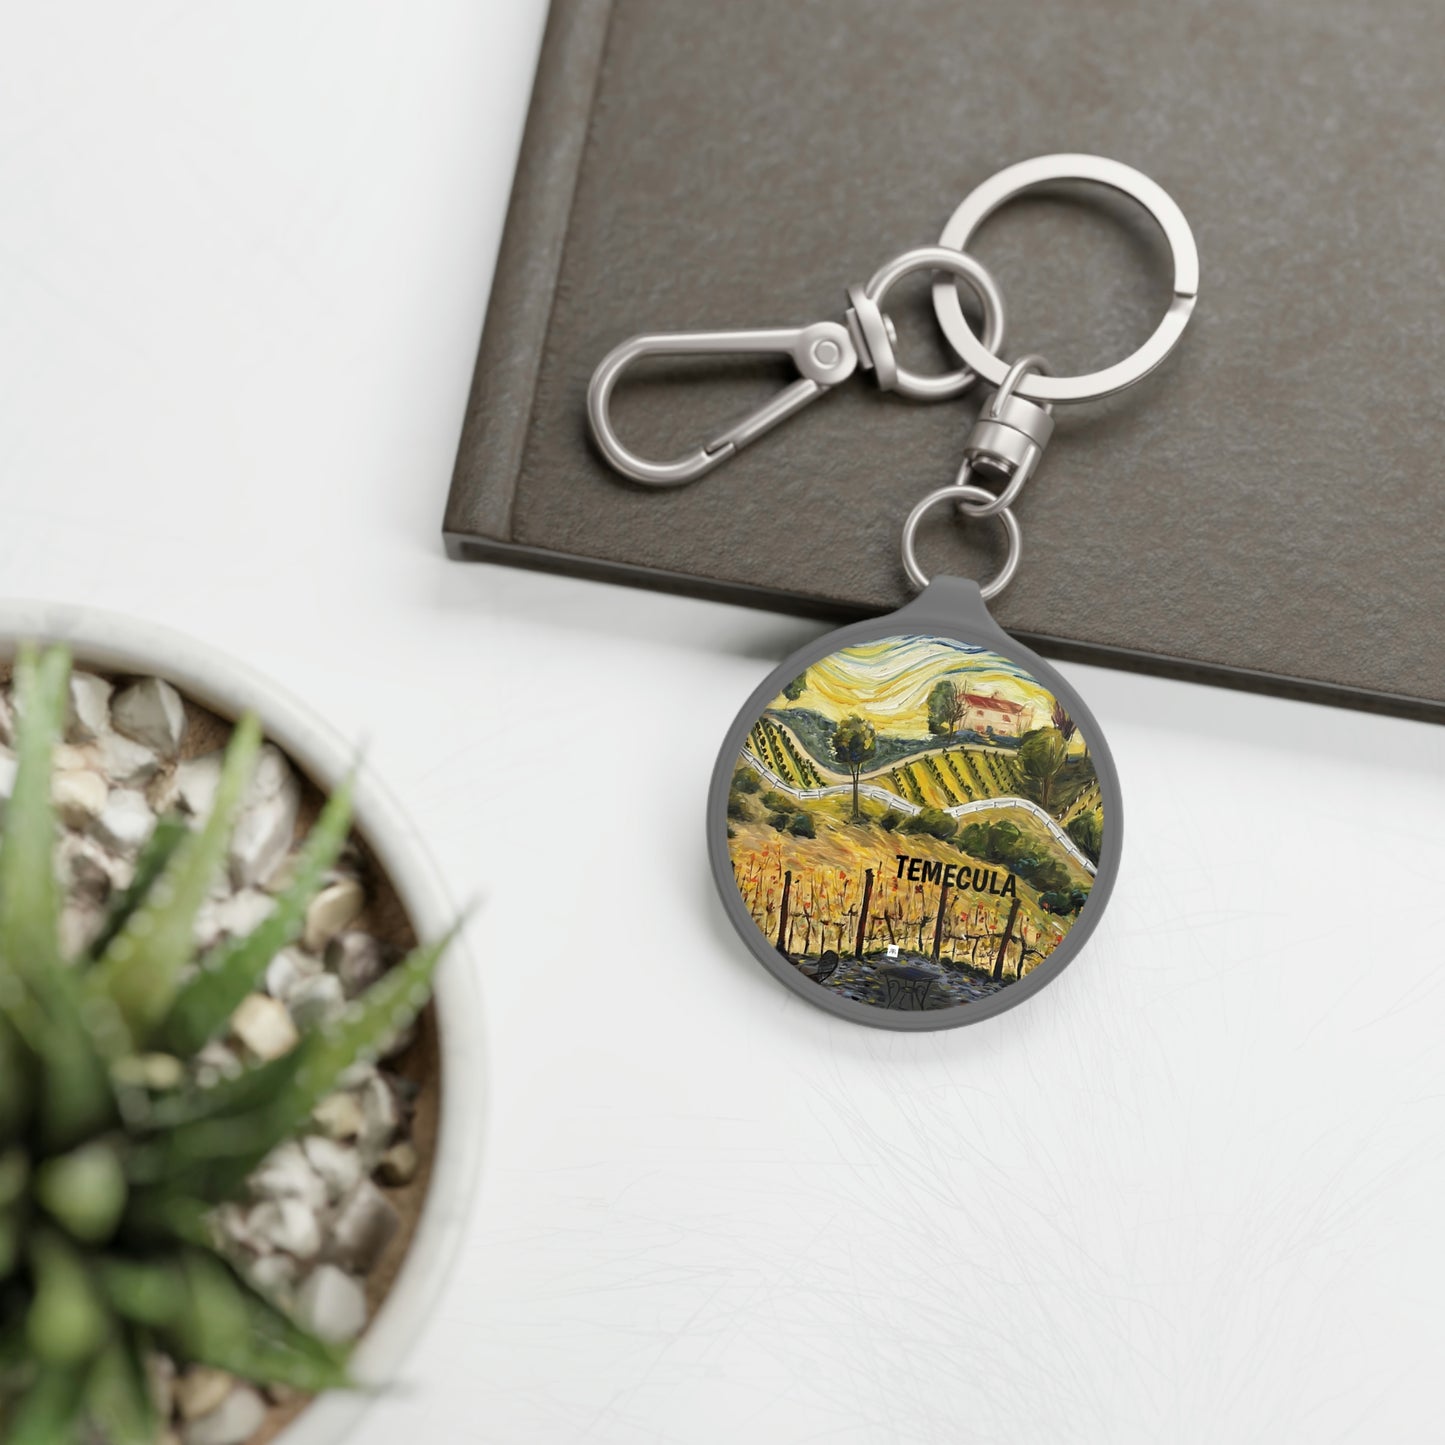 Temecula Keyring featuring "Sunset at the Villa" Landscape Painting by Roxy Rich